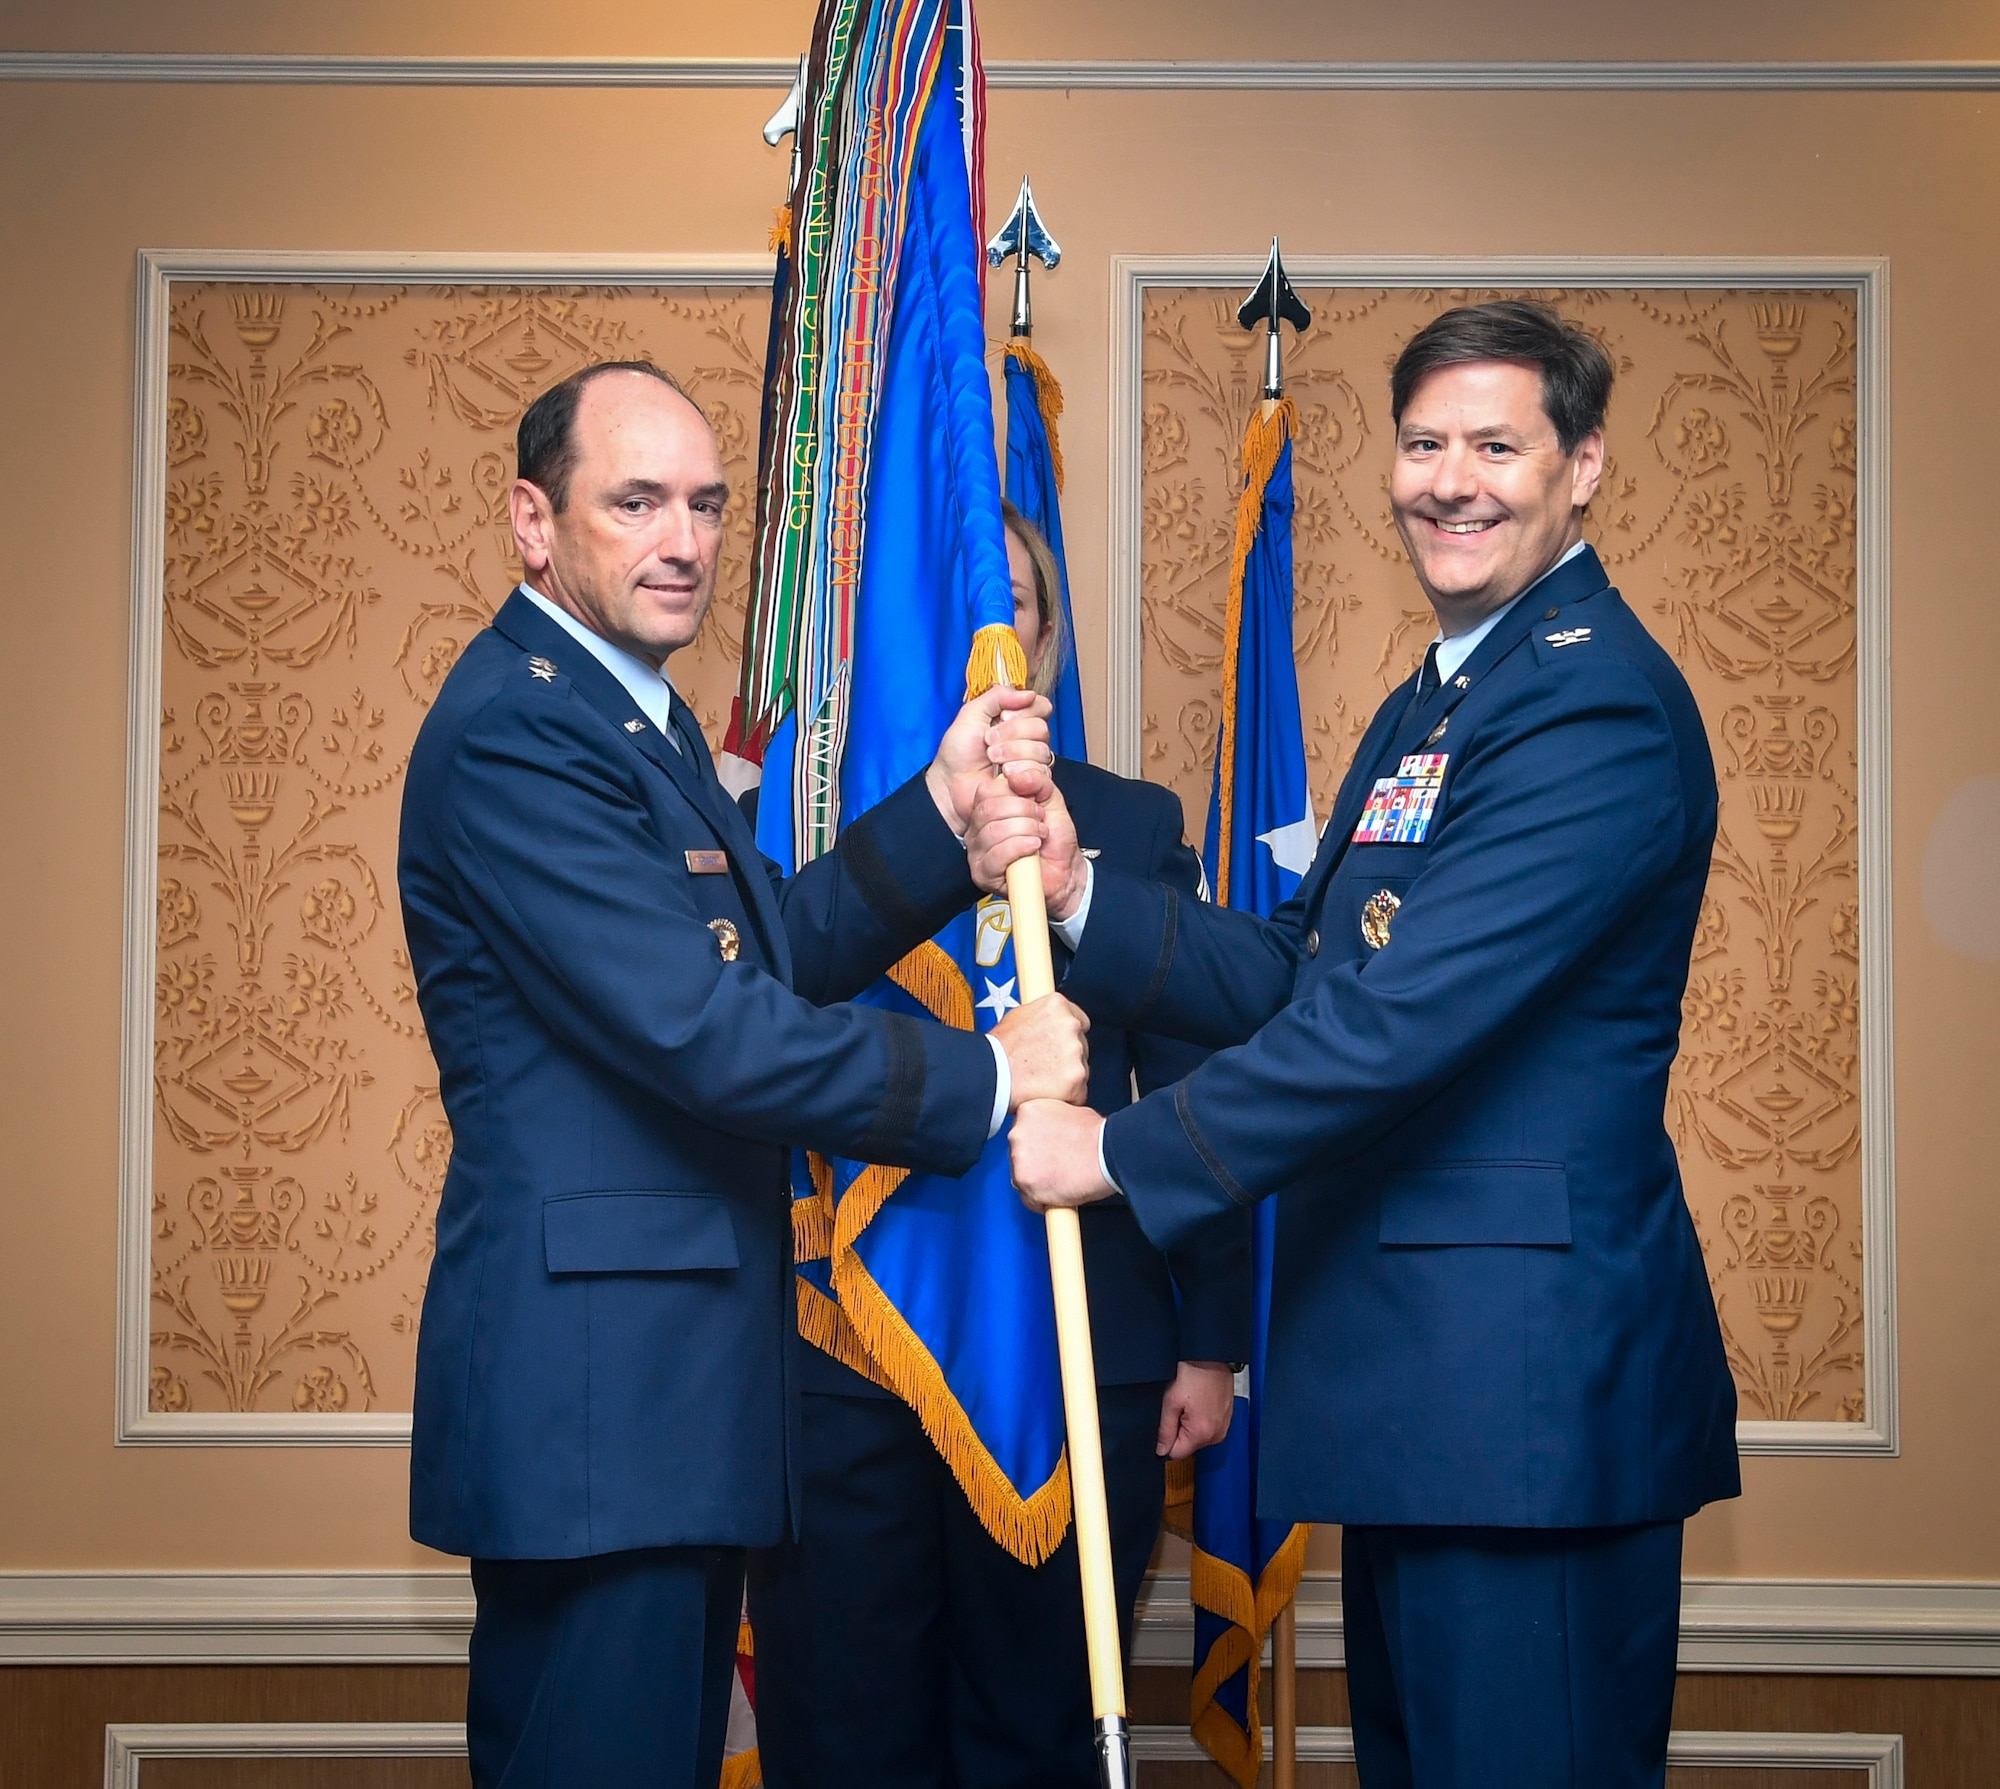 Two individuals hold a guidon for an Air Force Wing.